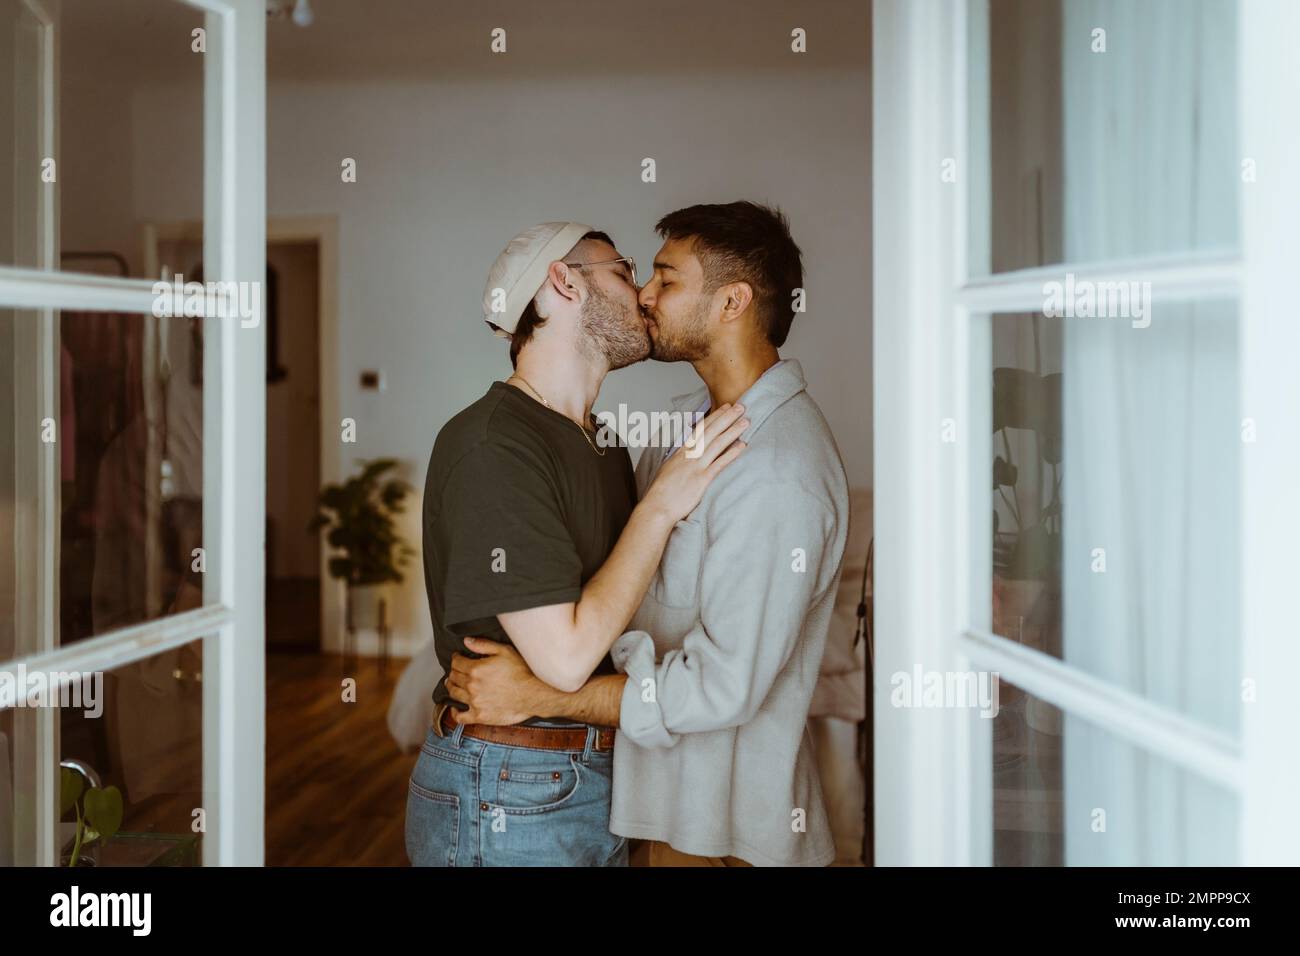 Side view of romantic gay couple kissing each other seen through doorway Stock Photo